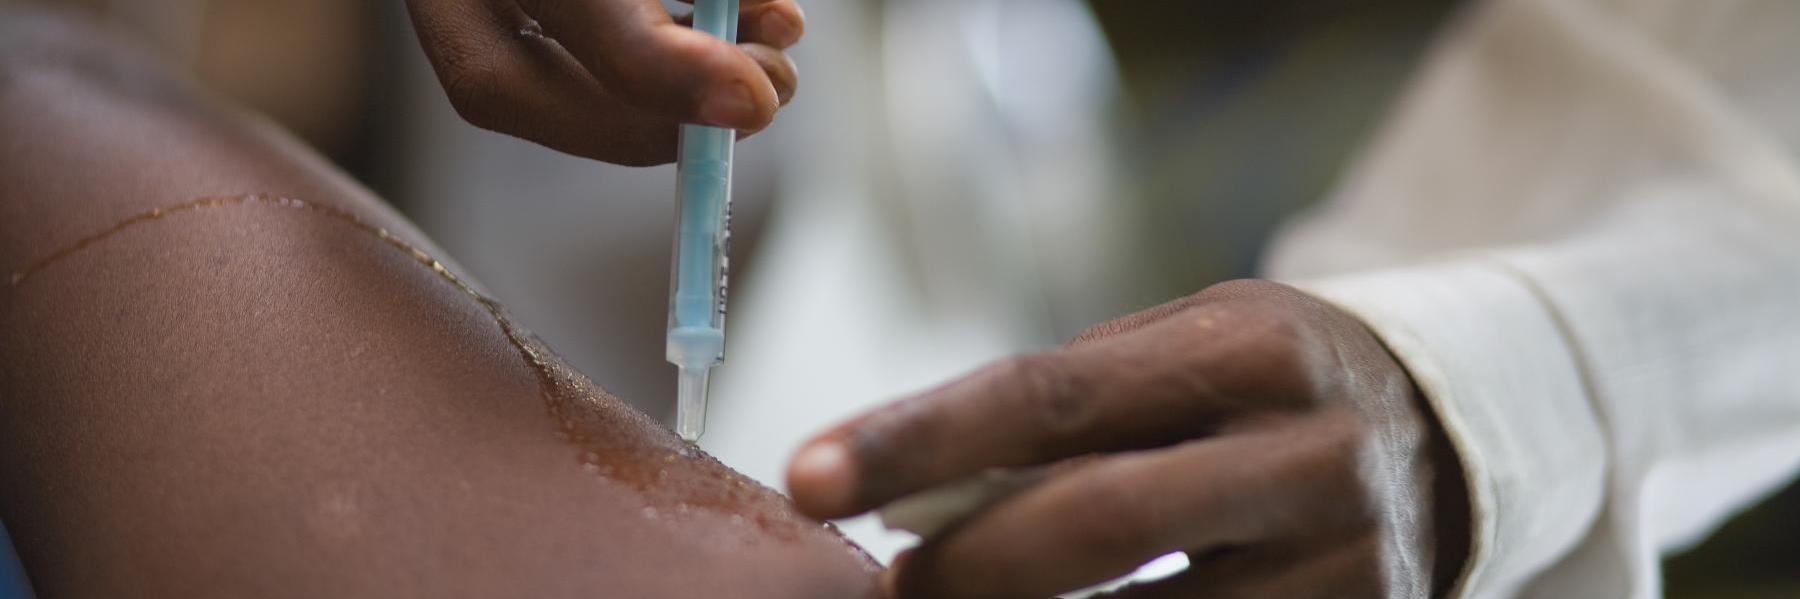 Close-up of an person's arm being injected with a vaccine in the Democratic Republic of Congo